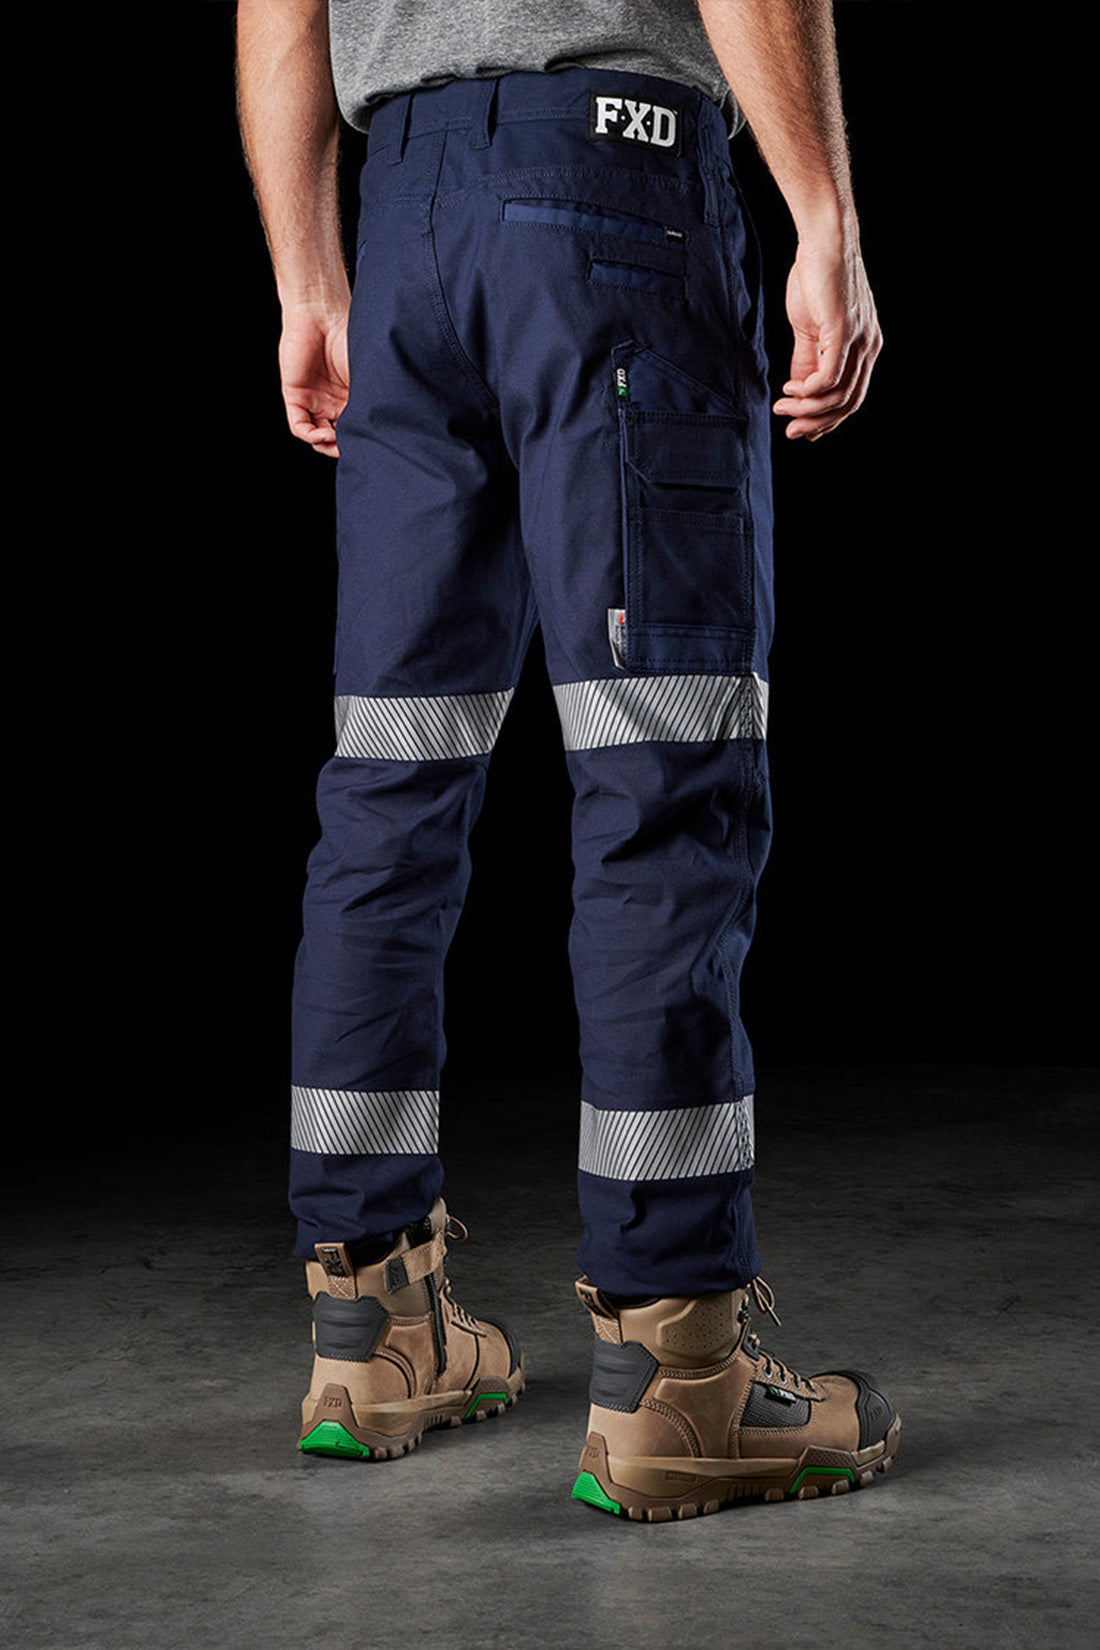 FXD WP-3T REFLECTIVE STRETCH WORK PANT NAVY